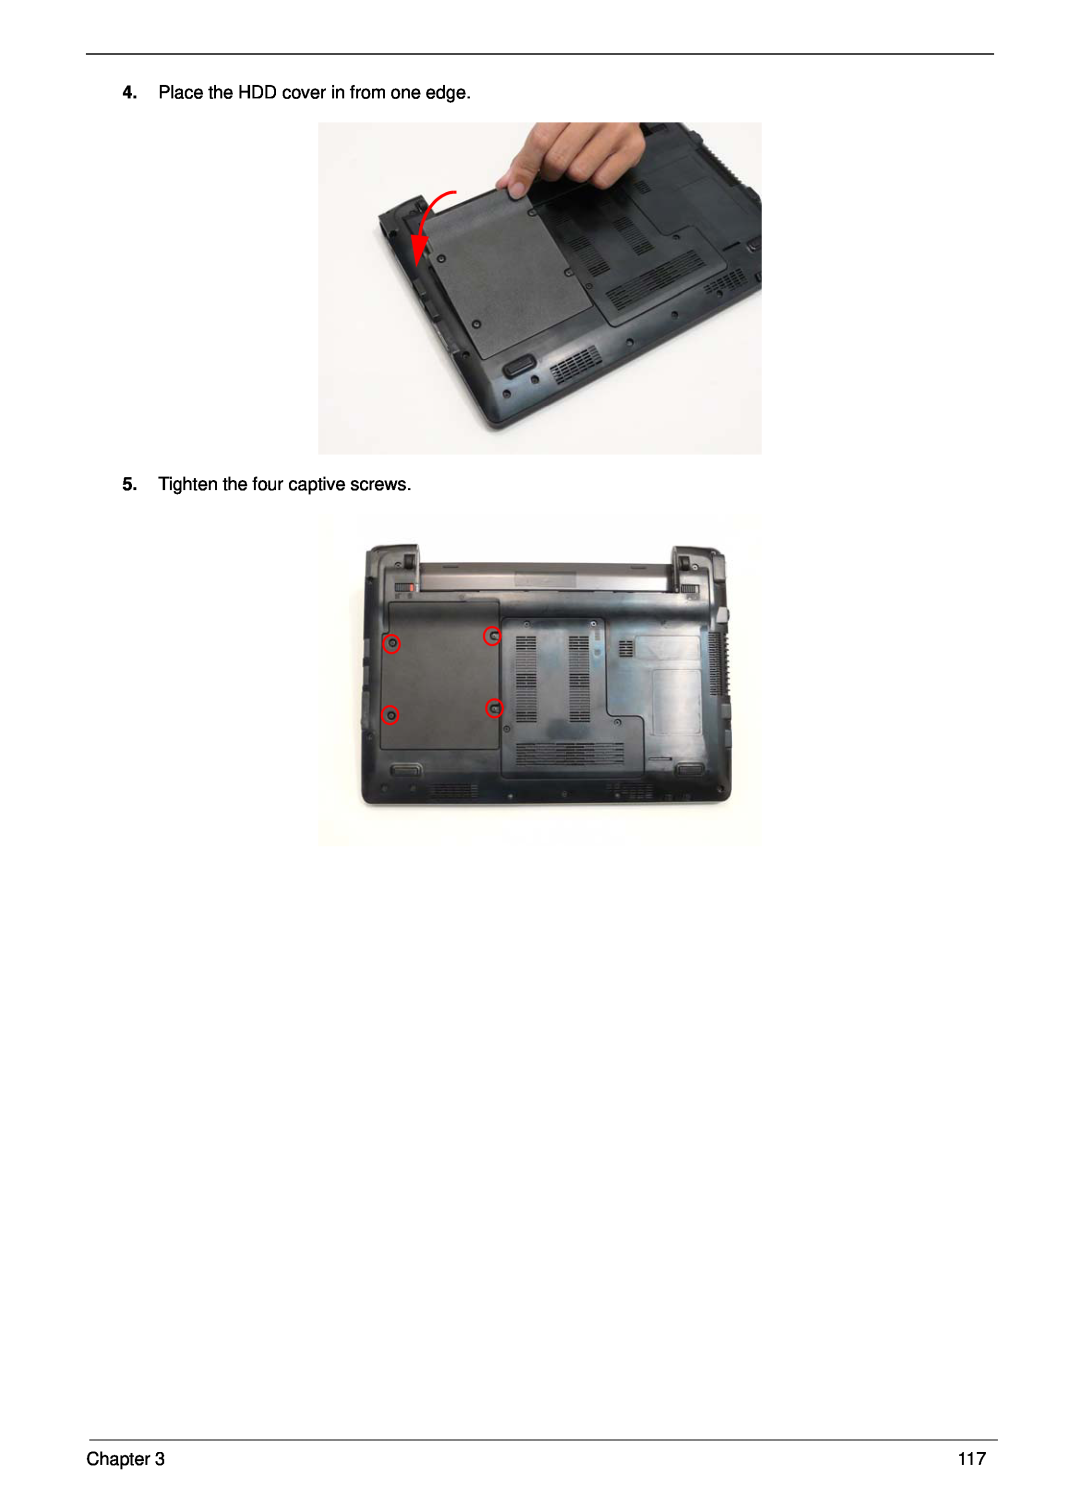 Gateway EC14 manual Place the HDD cover in from one edge, Tighten the four captive screws, Chapter 